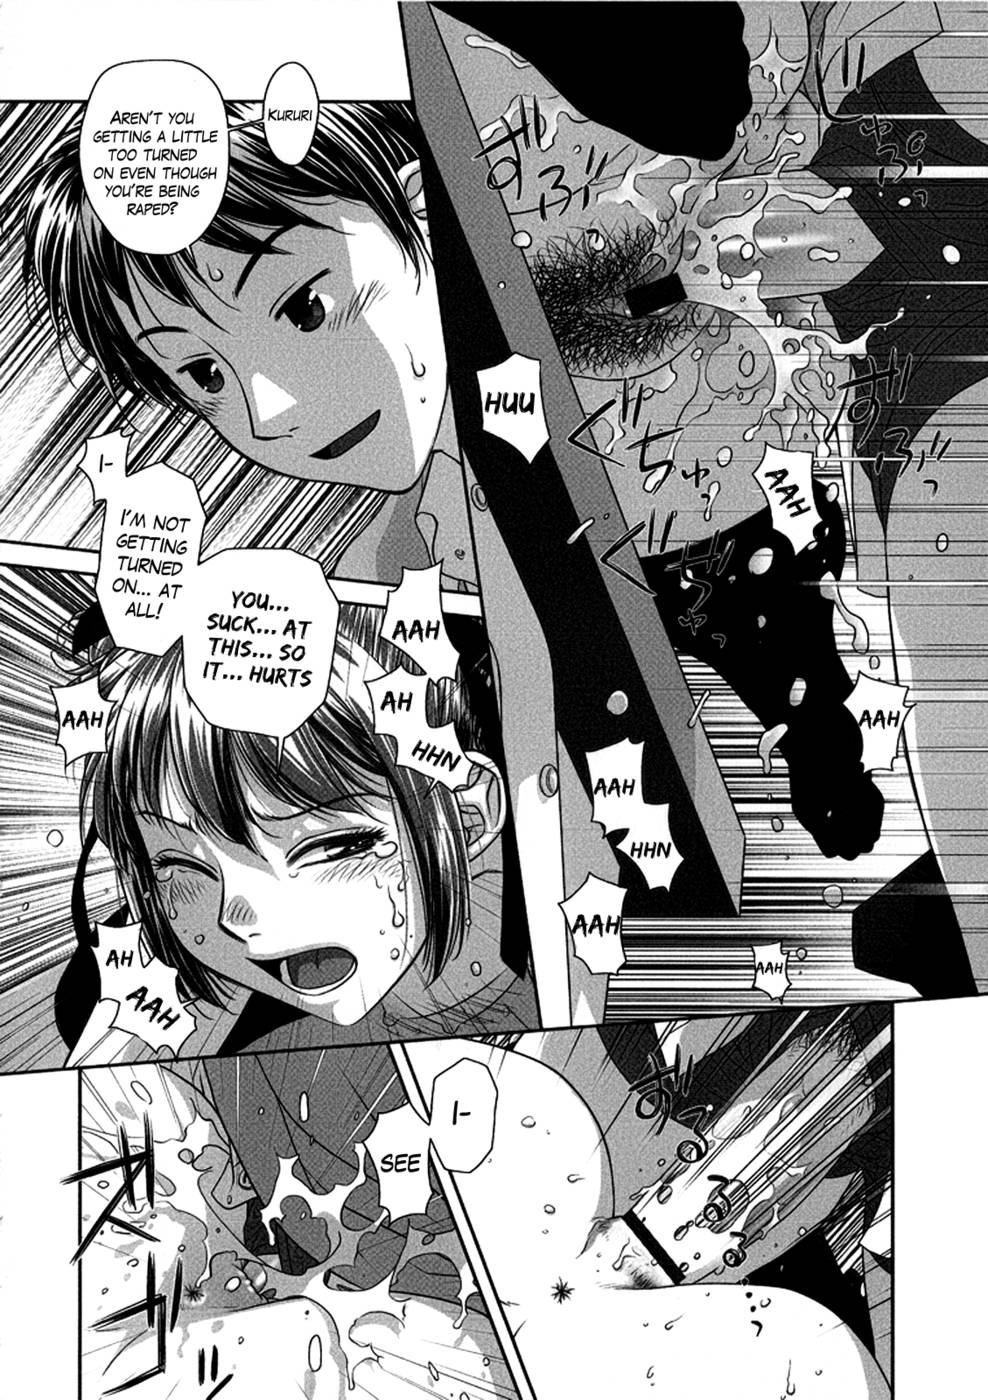 Hentai Manga Comic-Ruri Ruri-Chapter 8-The Circumstances Of The Twins- In The Case Of The Minami Sisters 2-2